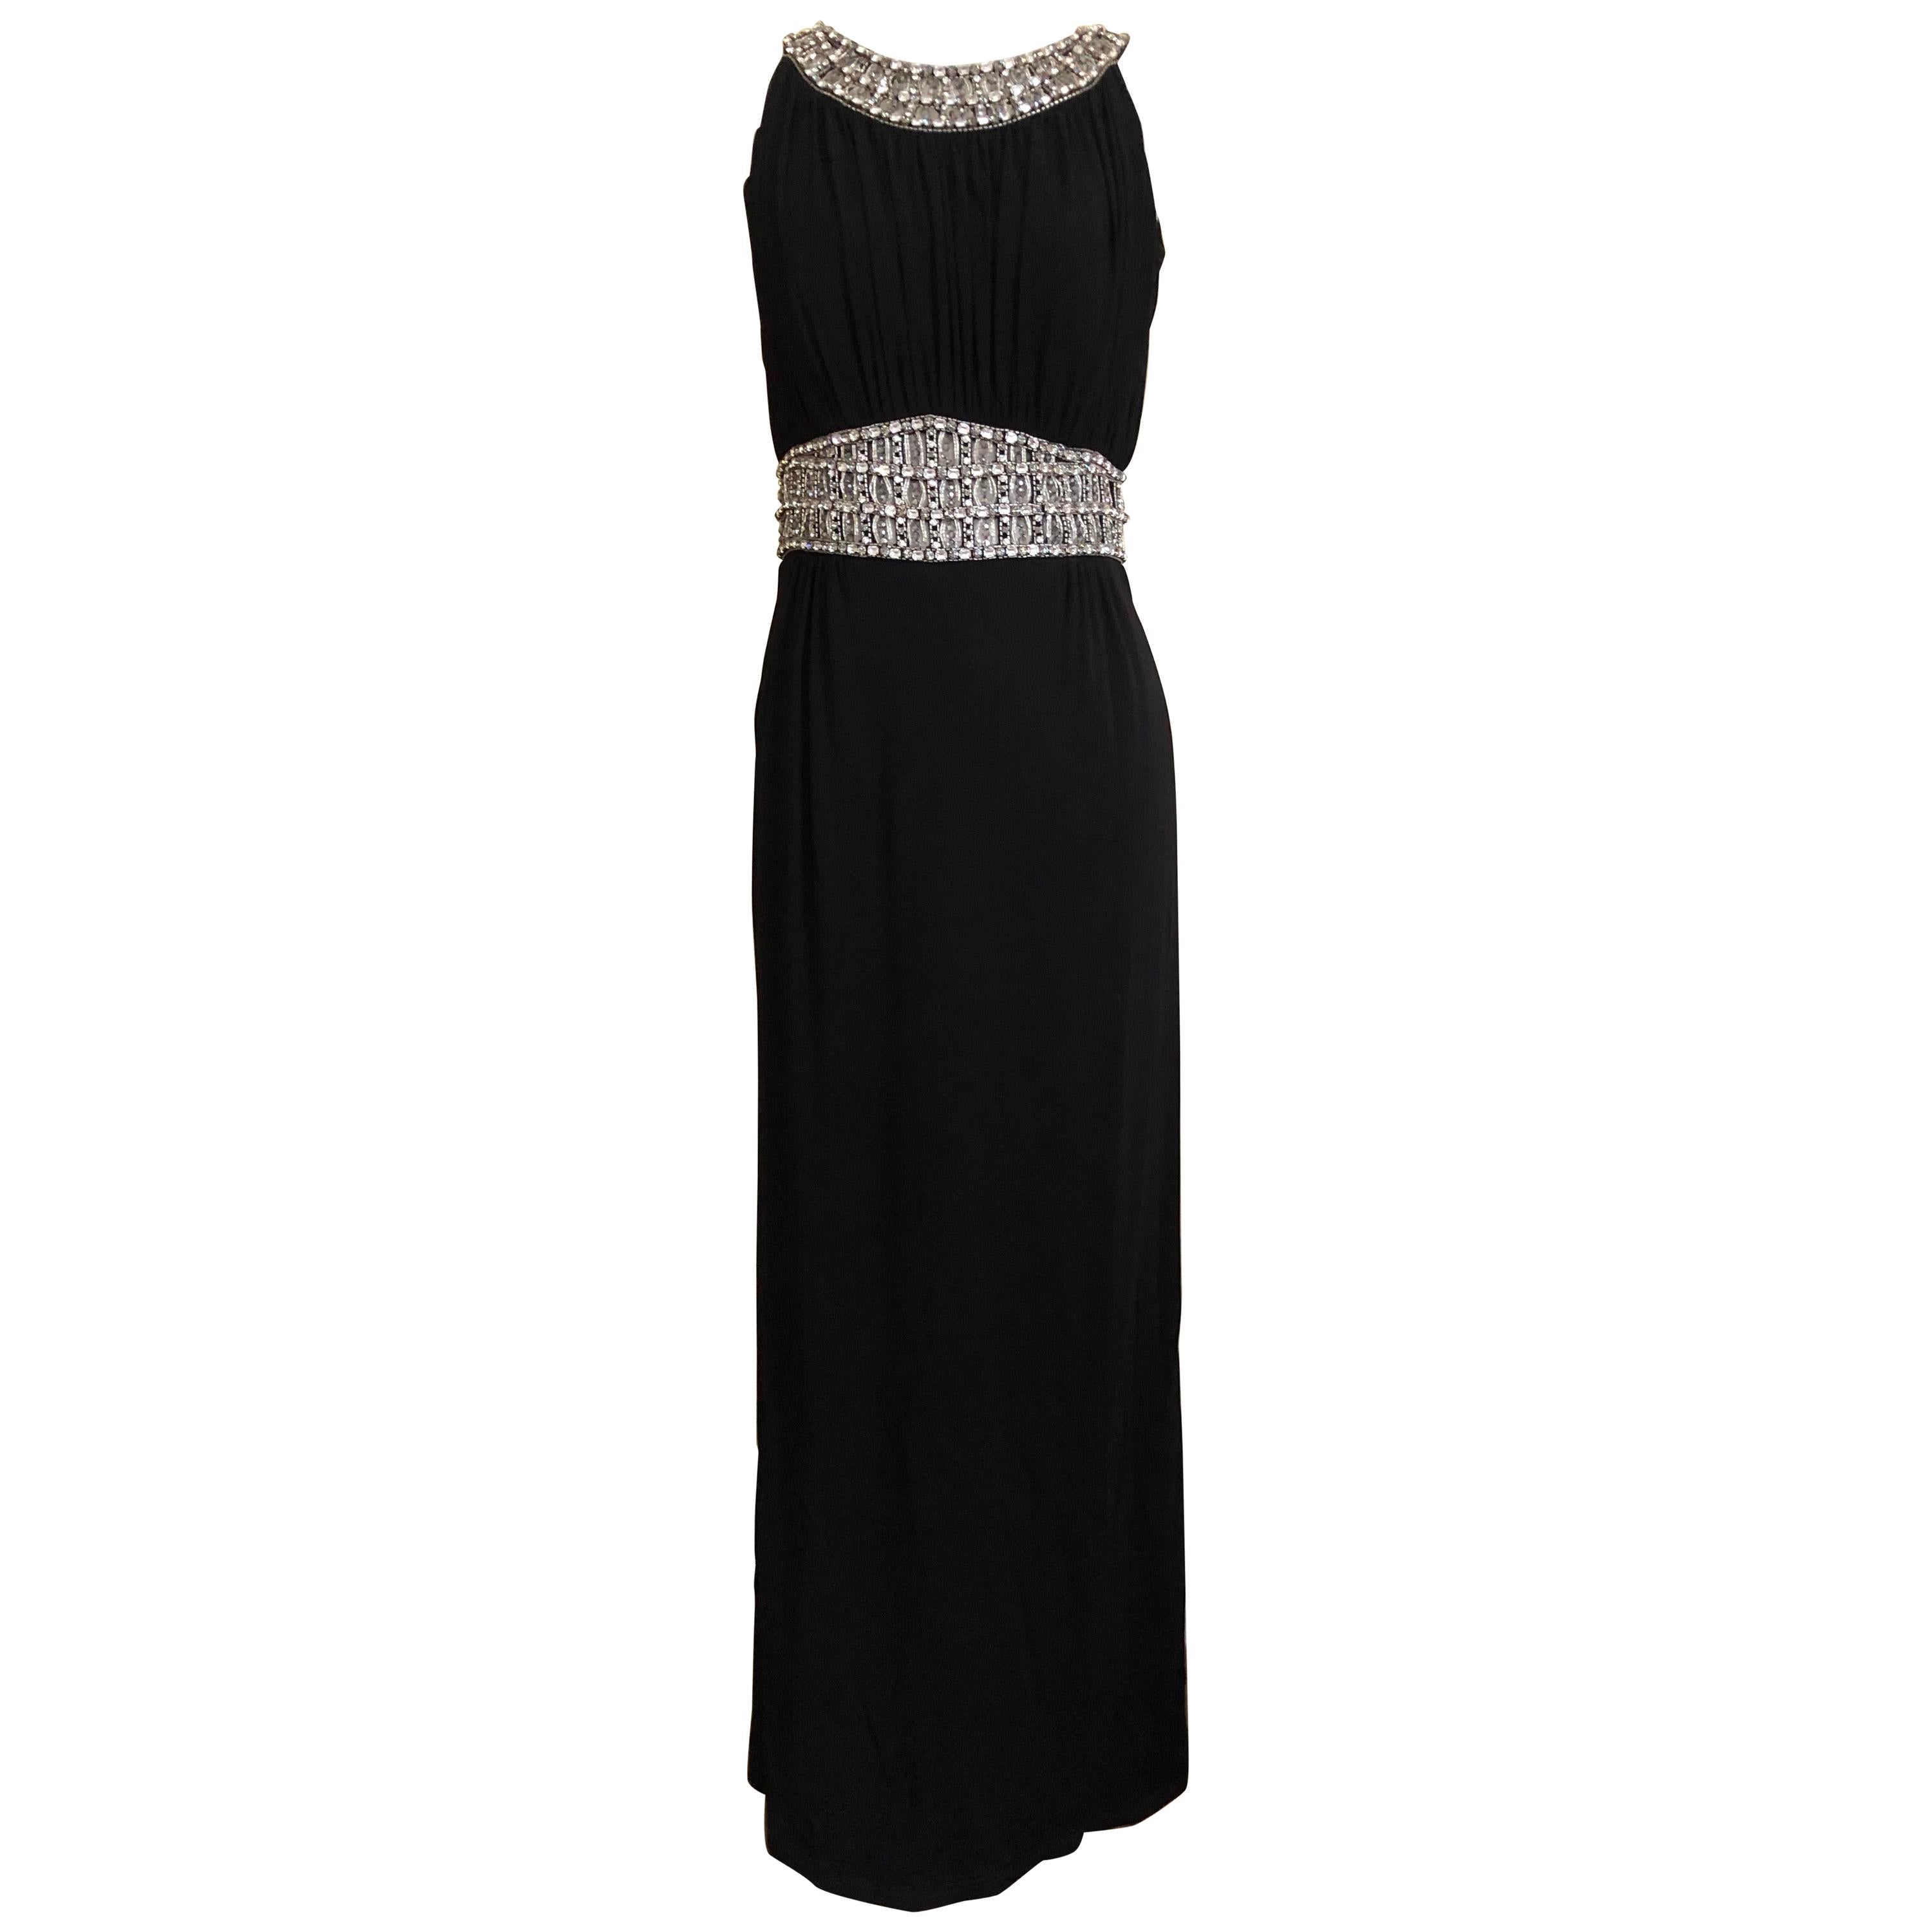 Azzaro Pleated Black Vintage Evening Dress with Jeweled Collar and Belt For Sale